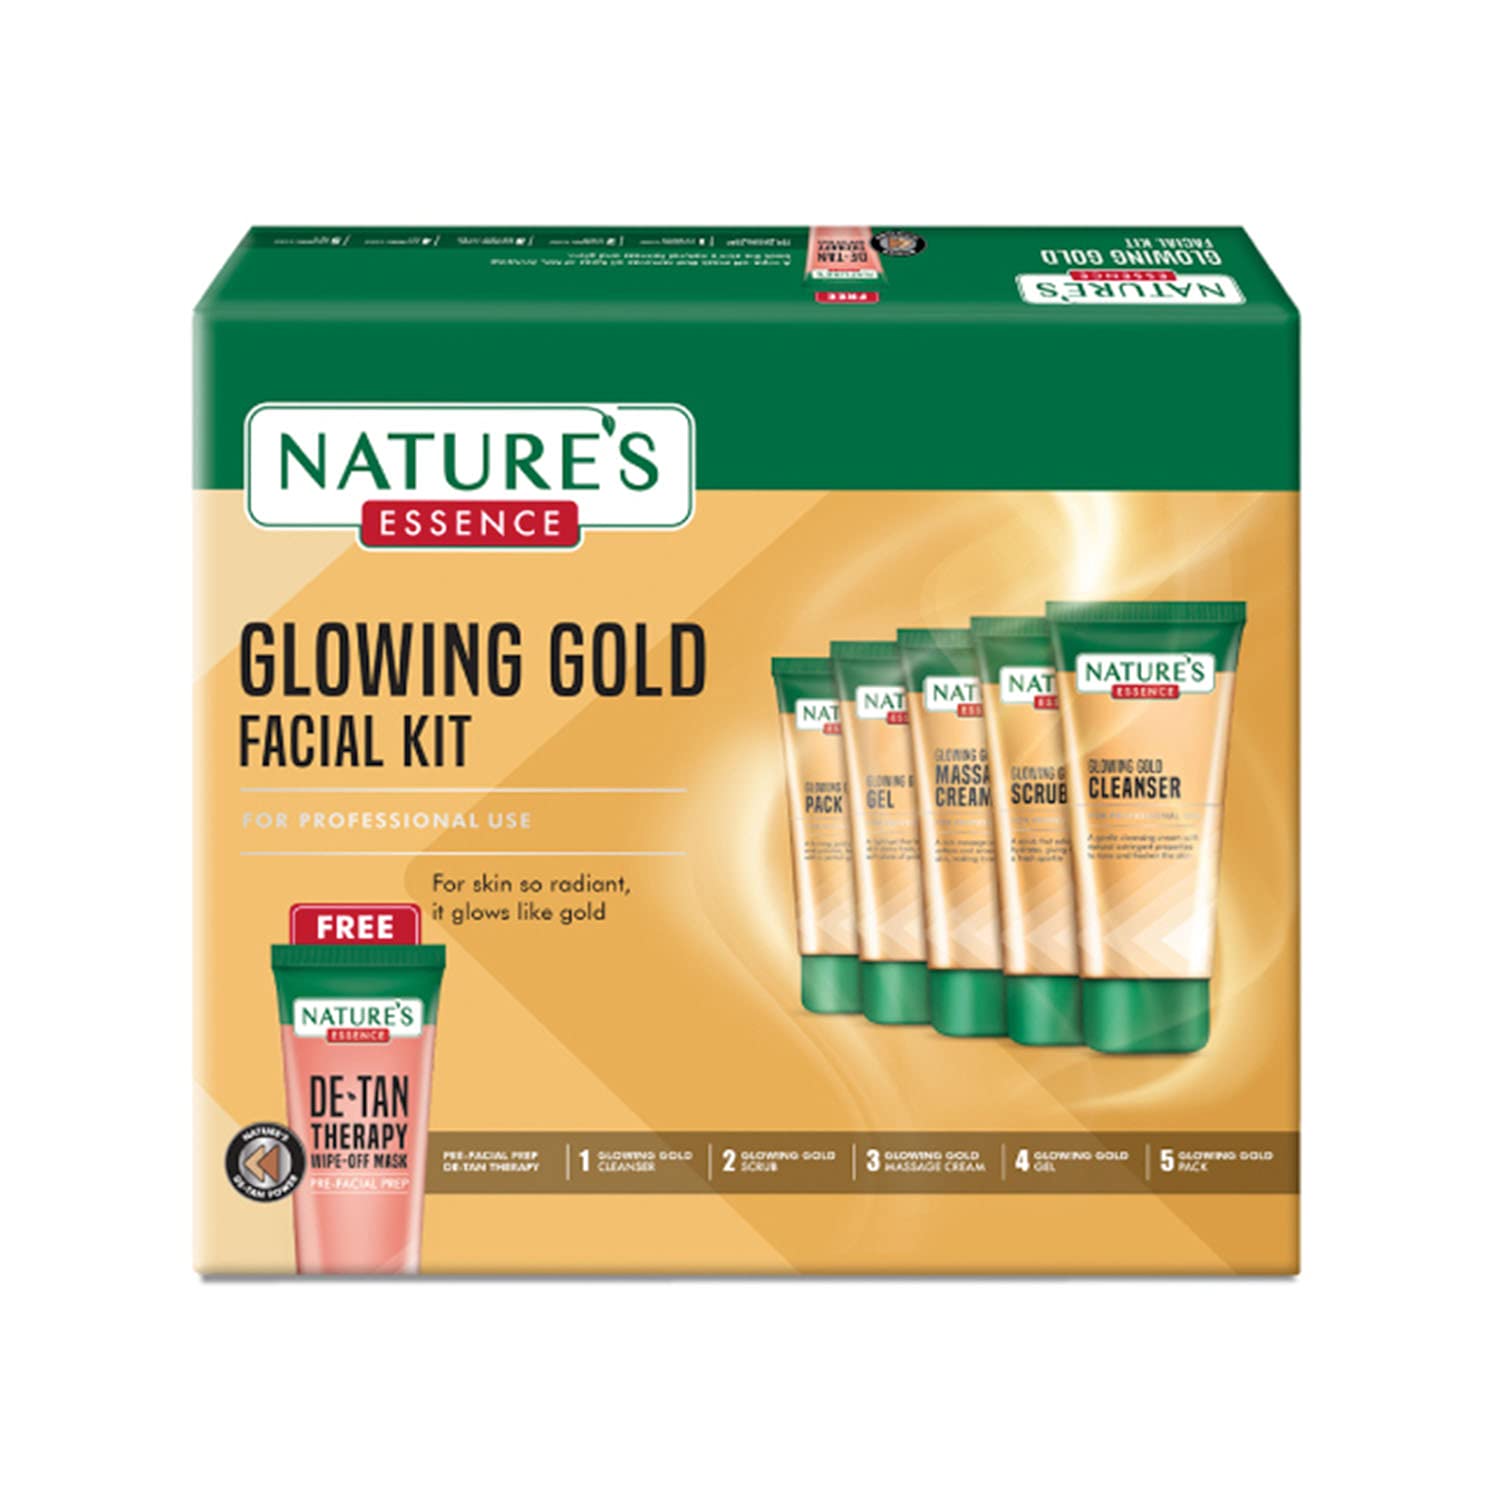 NATURES ESSENCE Glowing Gold Facial Kit, 500g